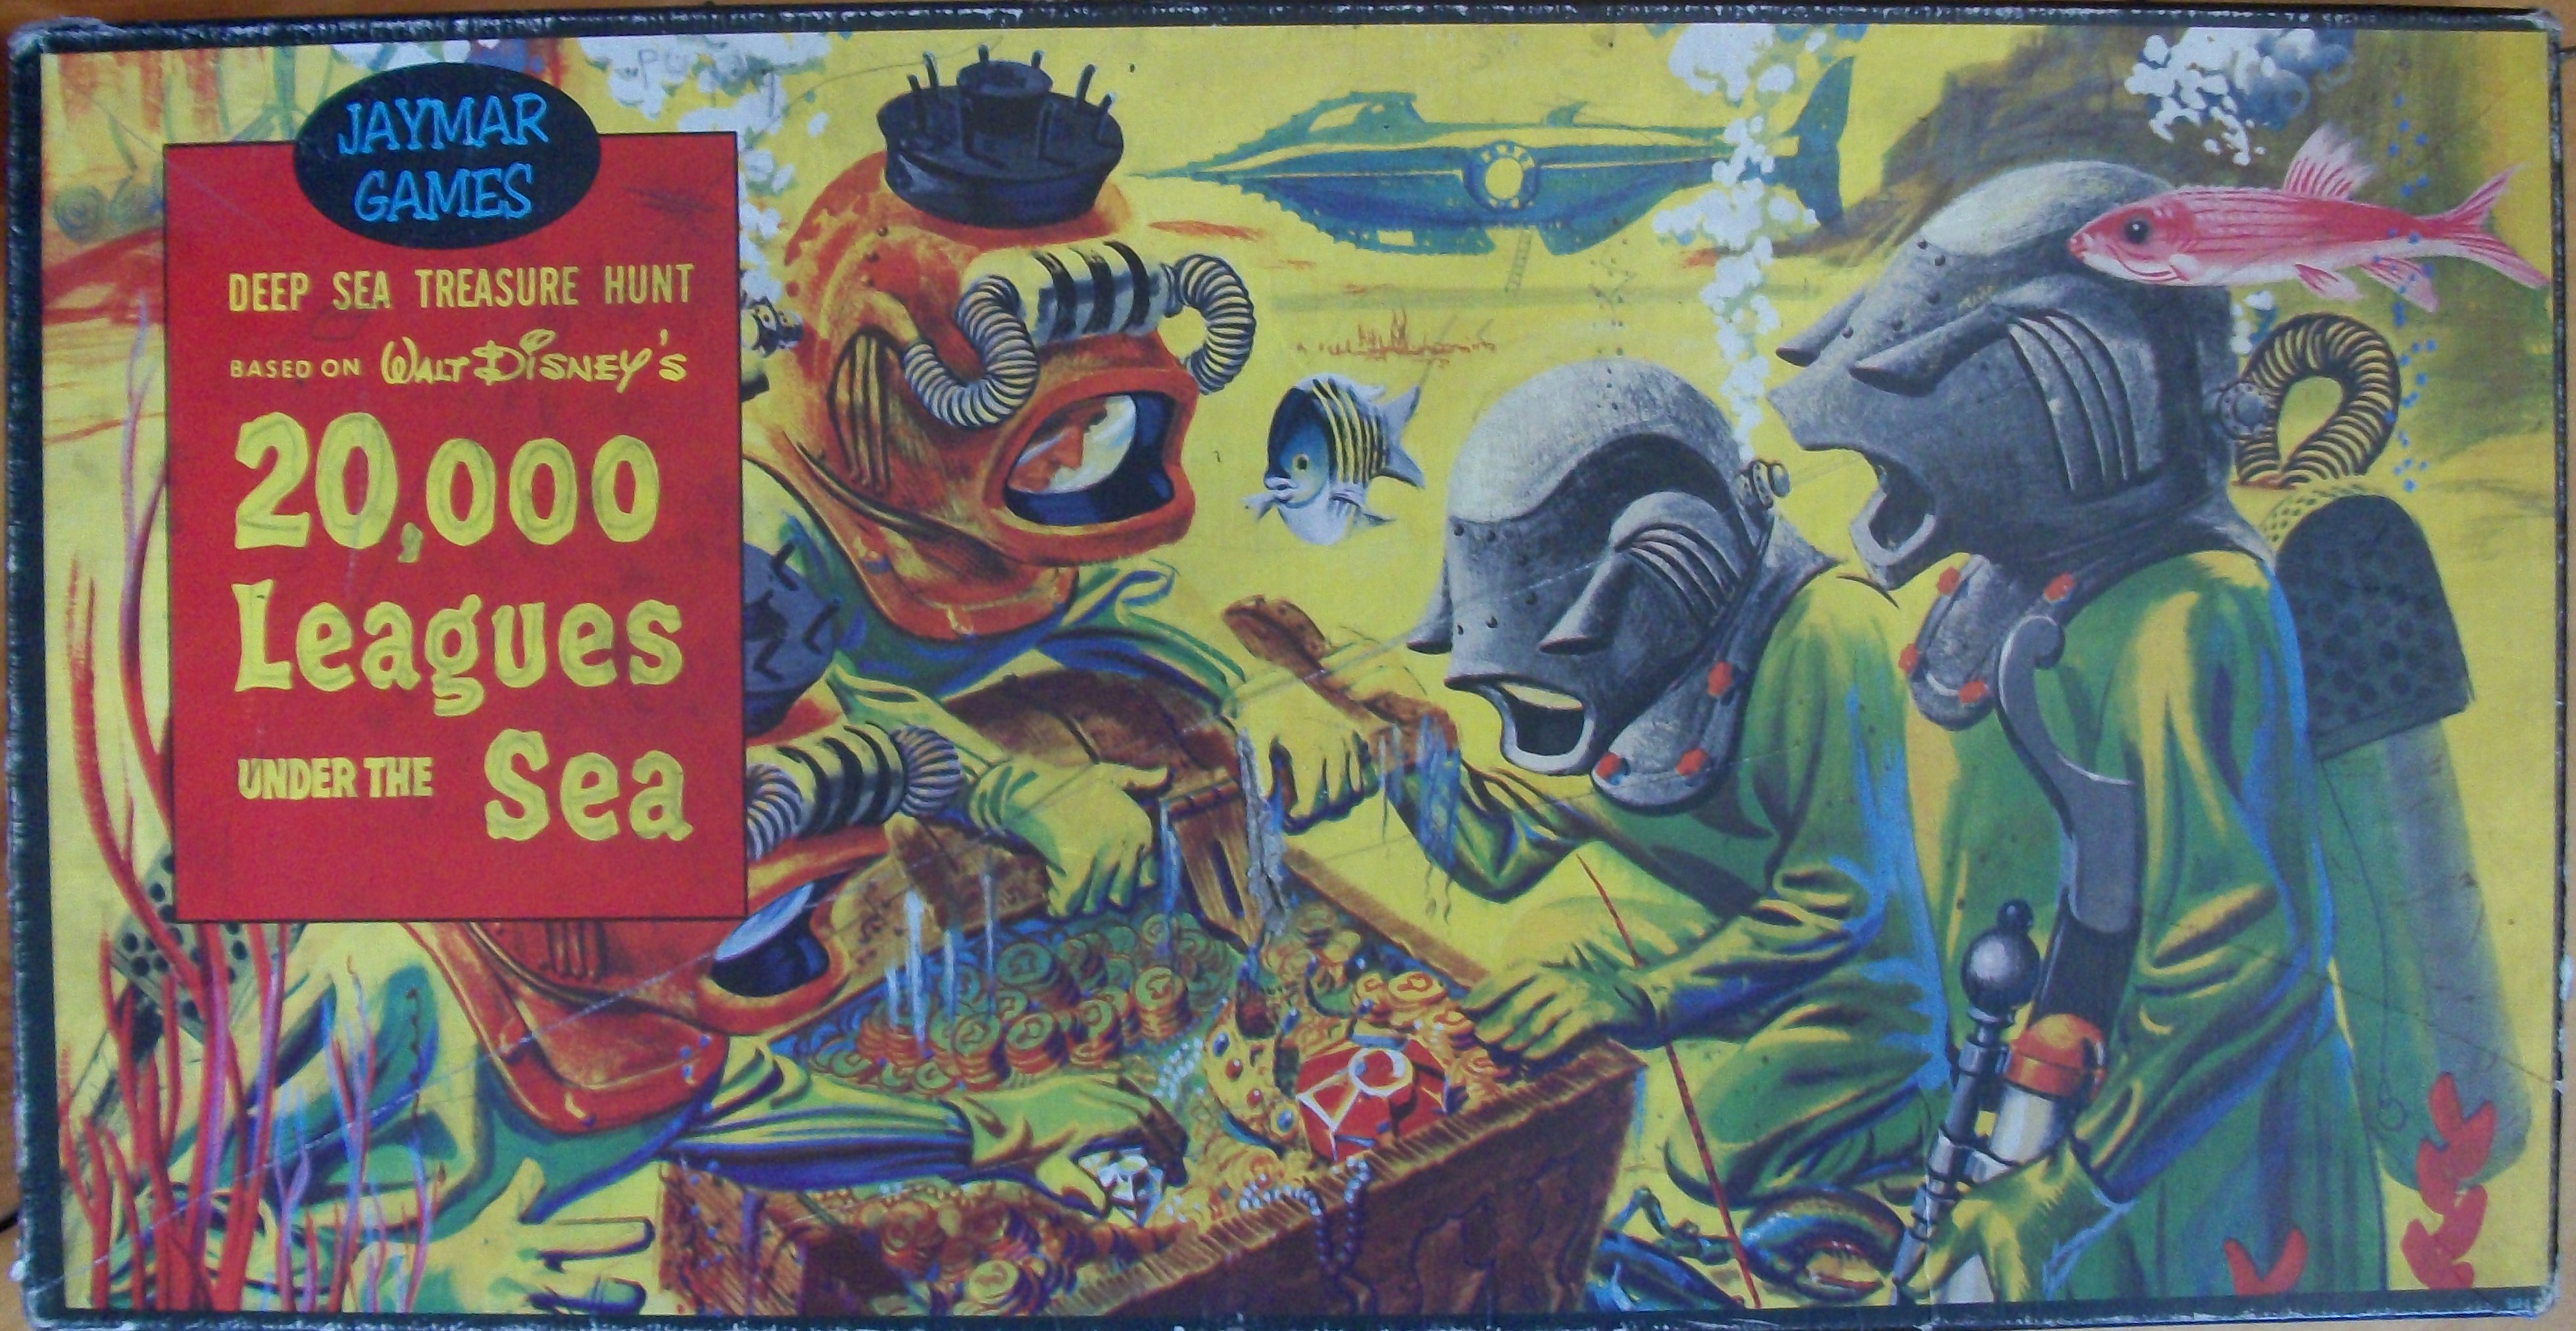 The Vintage 1954 Game of 20,000 Leagues under the Sea